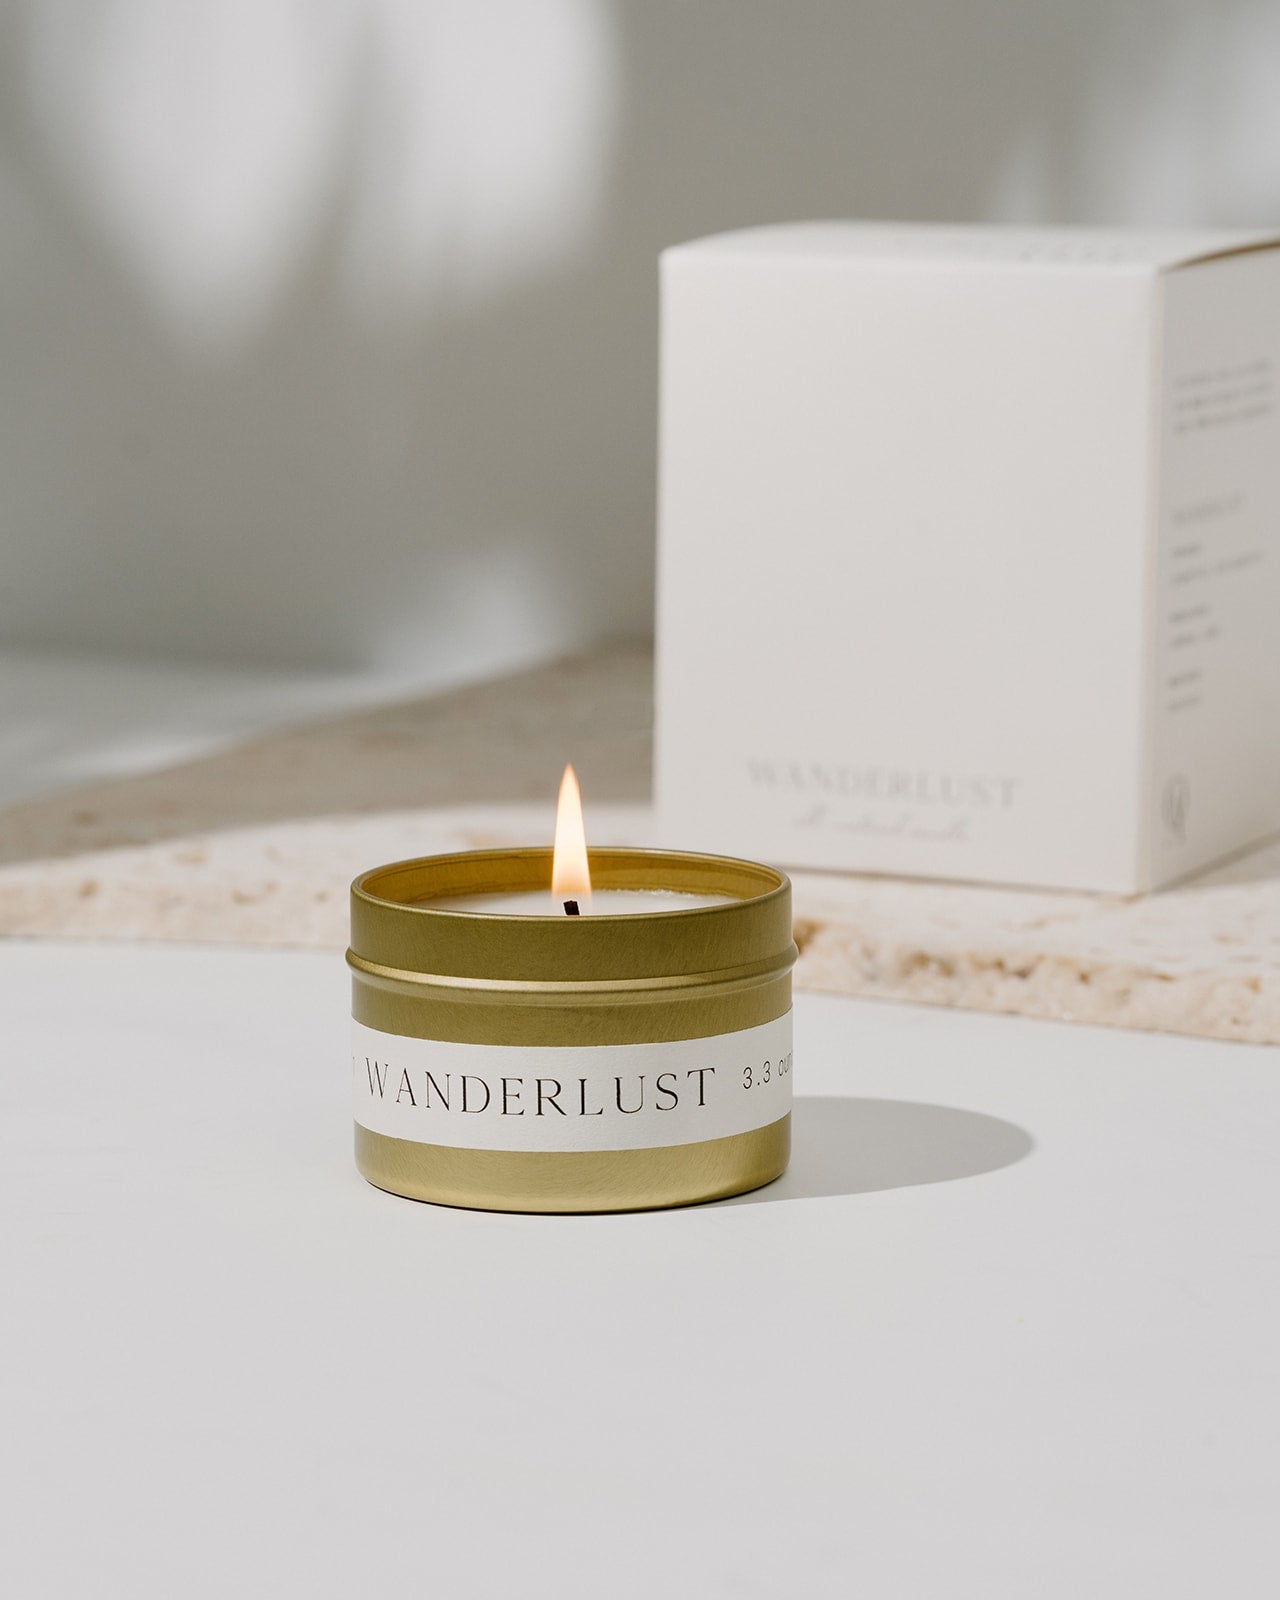 WANDERLUST Travel Tin Candle by Orchid + Ash